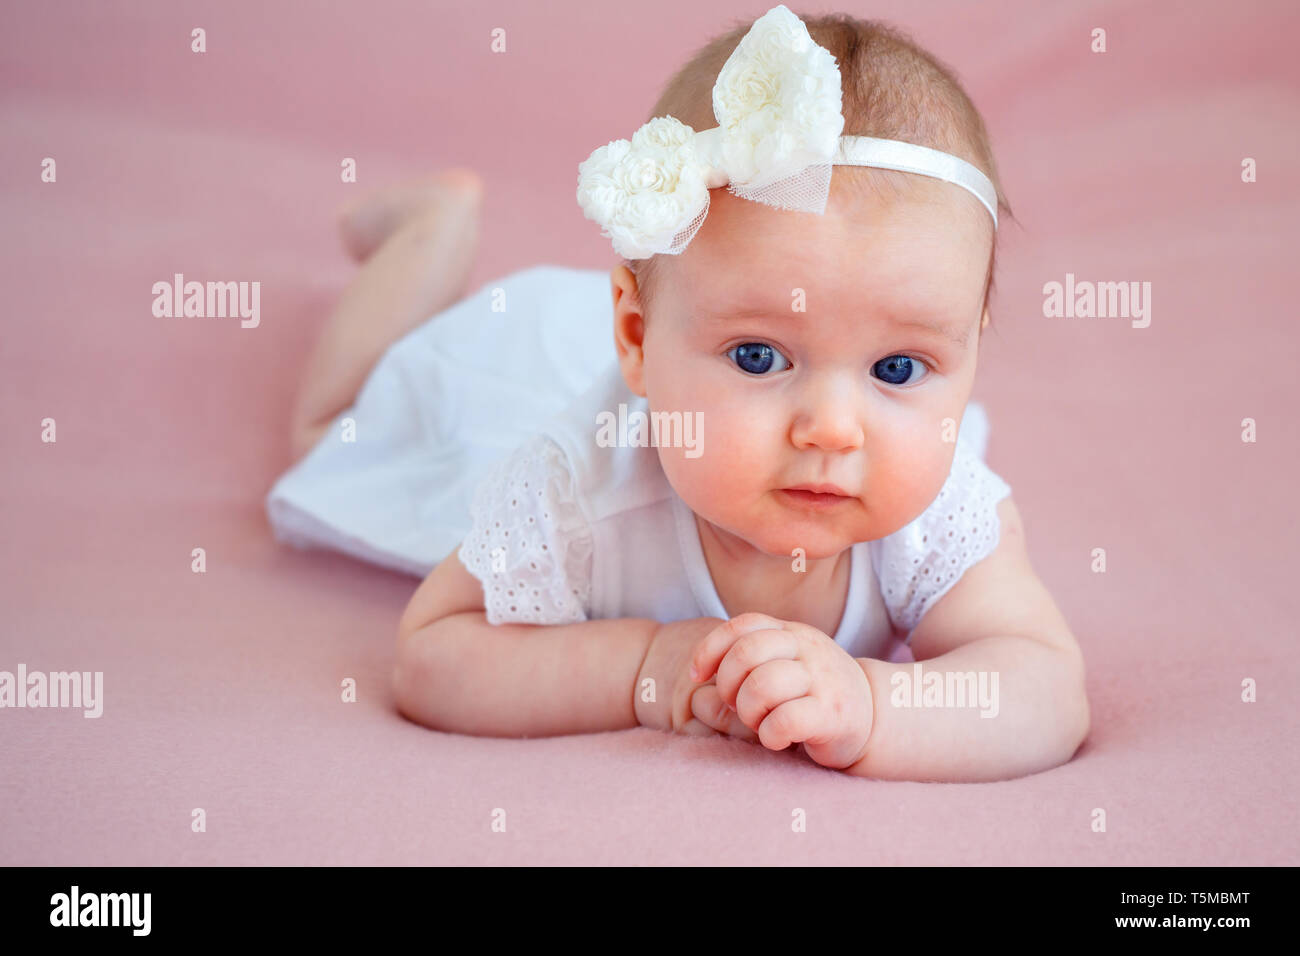 Portrait of a cute newborn baby girl in white dress and hairband lying on her stomach in bedroom on pink soft blanket Stock Photo